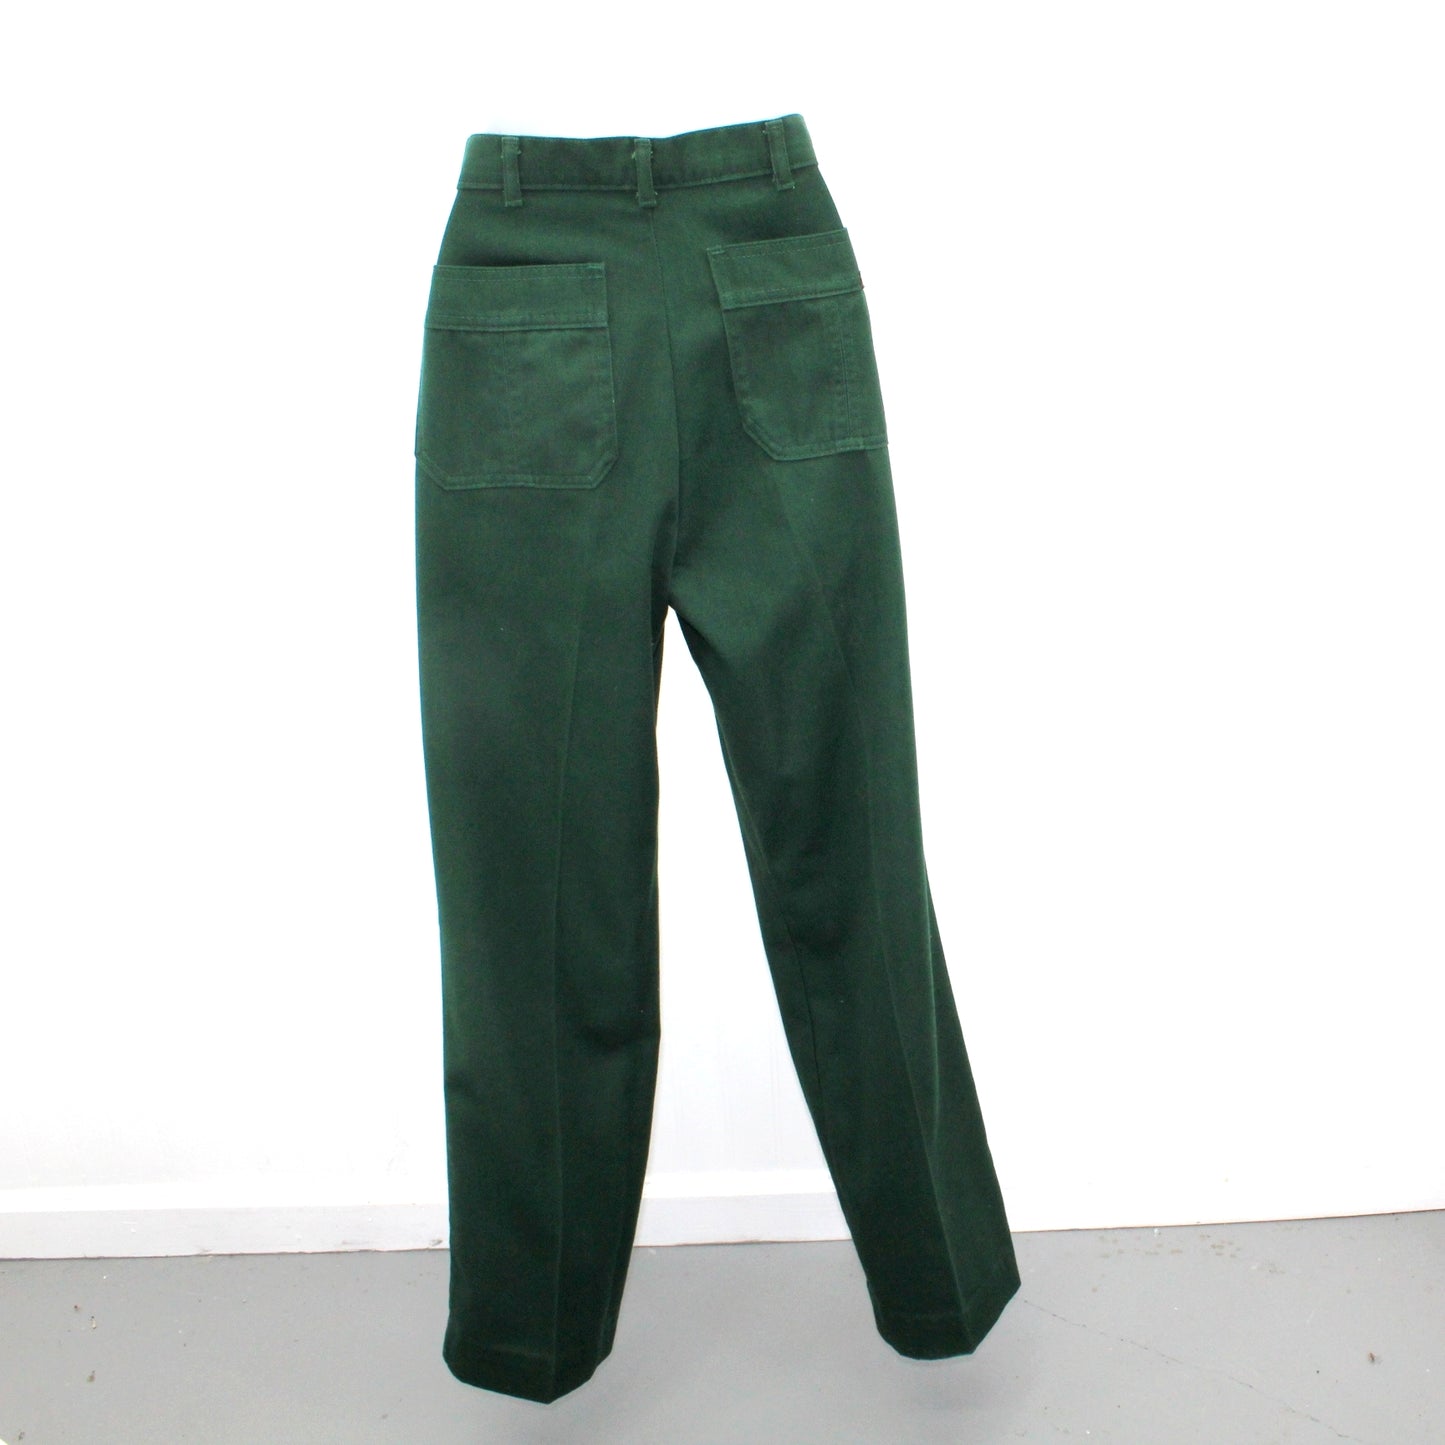 Early 1960s McGregor Womens Straight Hi Rise Mom's Pants Dark Green Twill Waist 29" mom jeans 1960 style